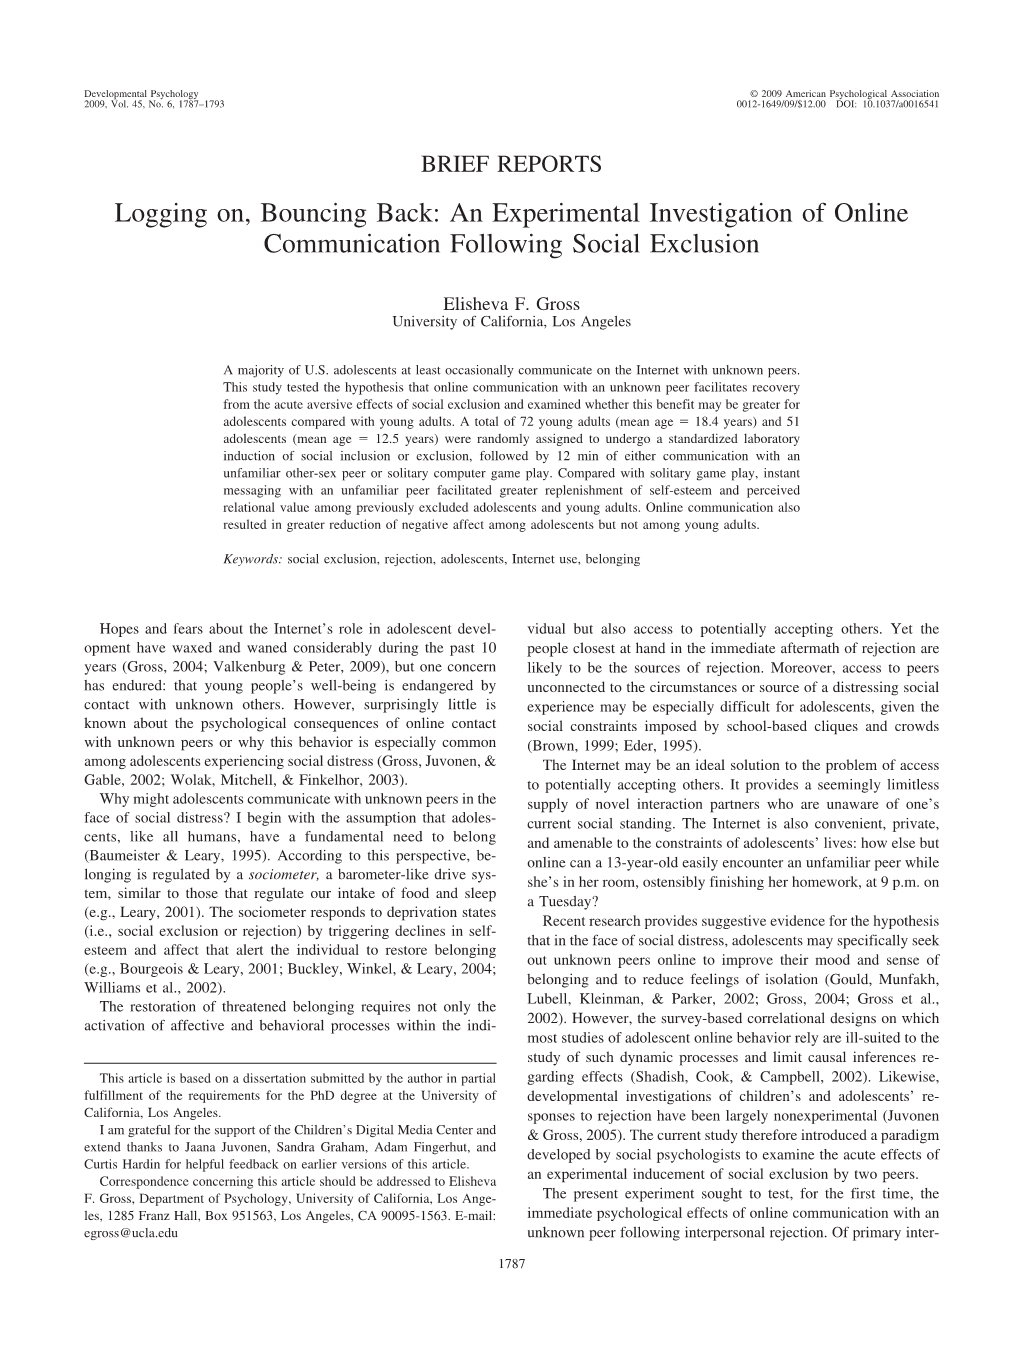 Logging On, Bouncing Back: an Experimental Investigation of Online Communication Following Social Exclusion